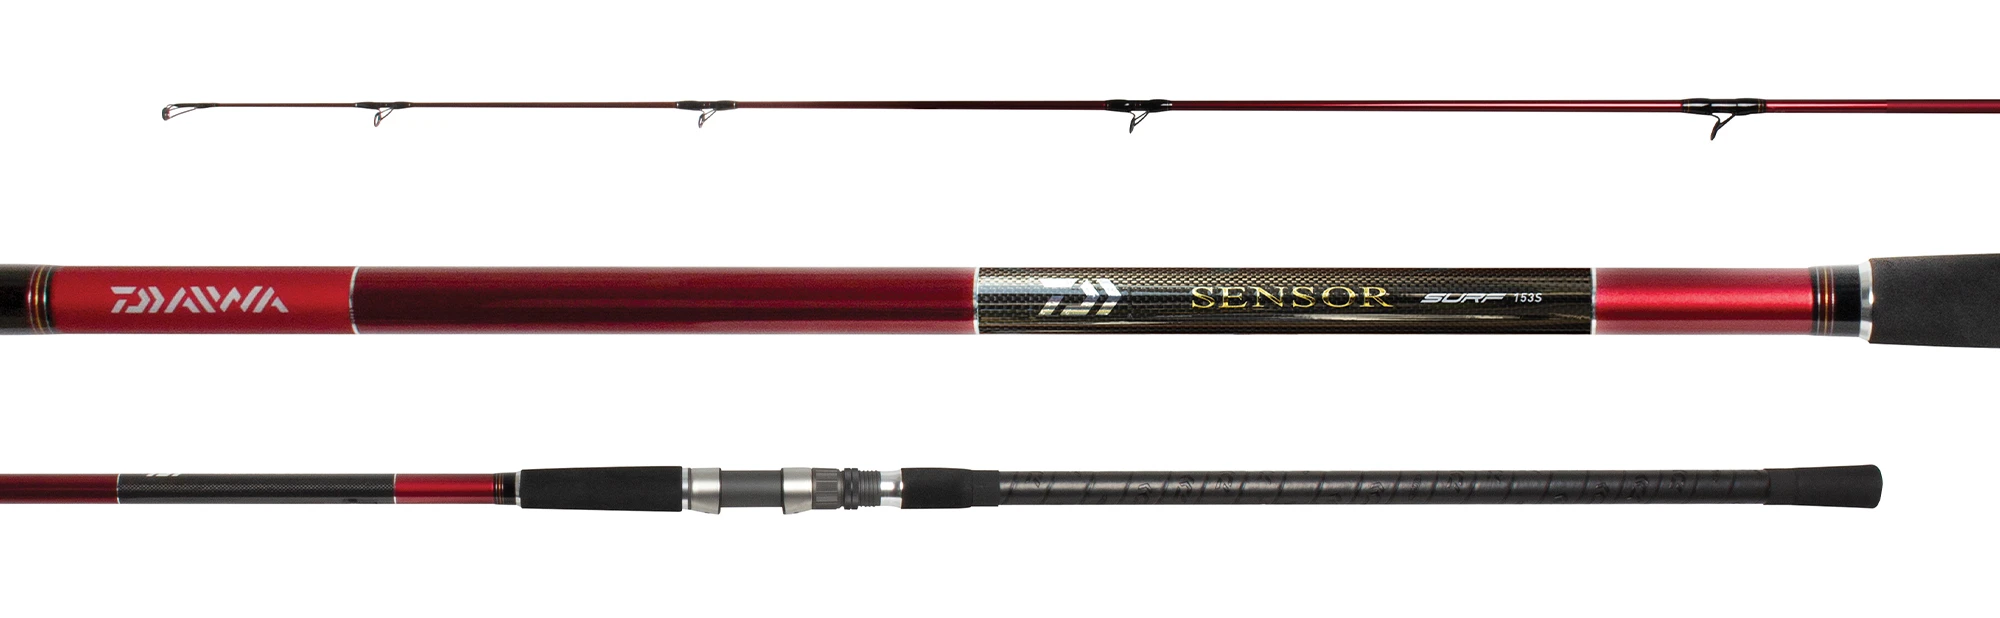 Daiwa Sensor 15ft 3 Piece Surf Rod - Buy from NZ owned businesses - Over  500,000 products available 